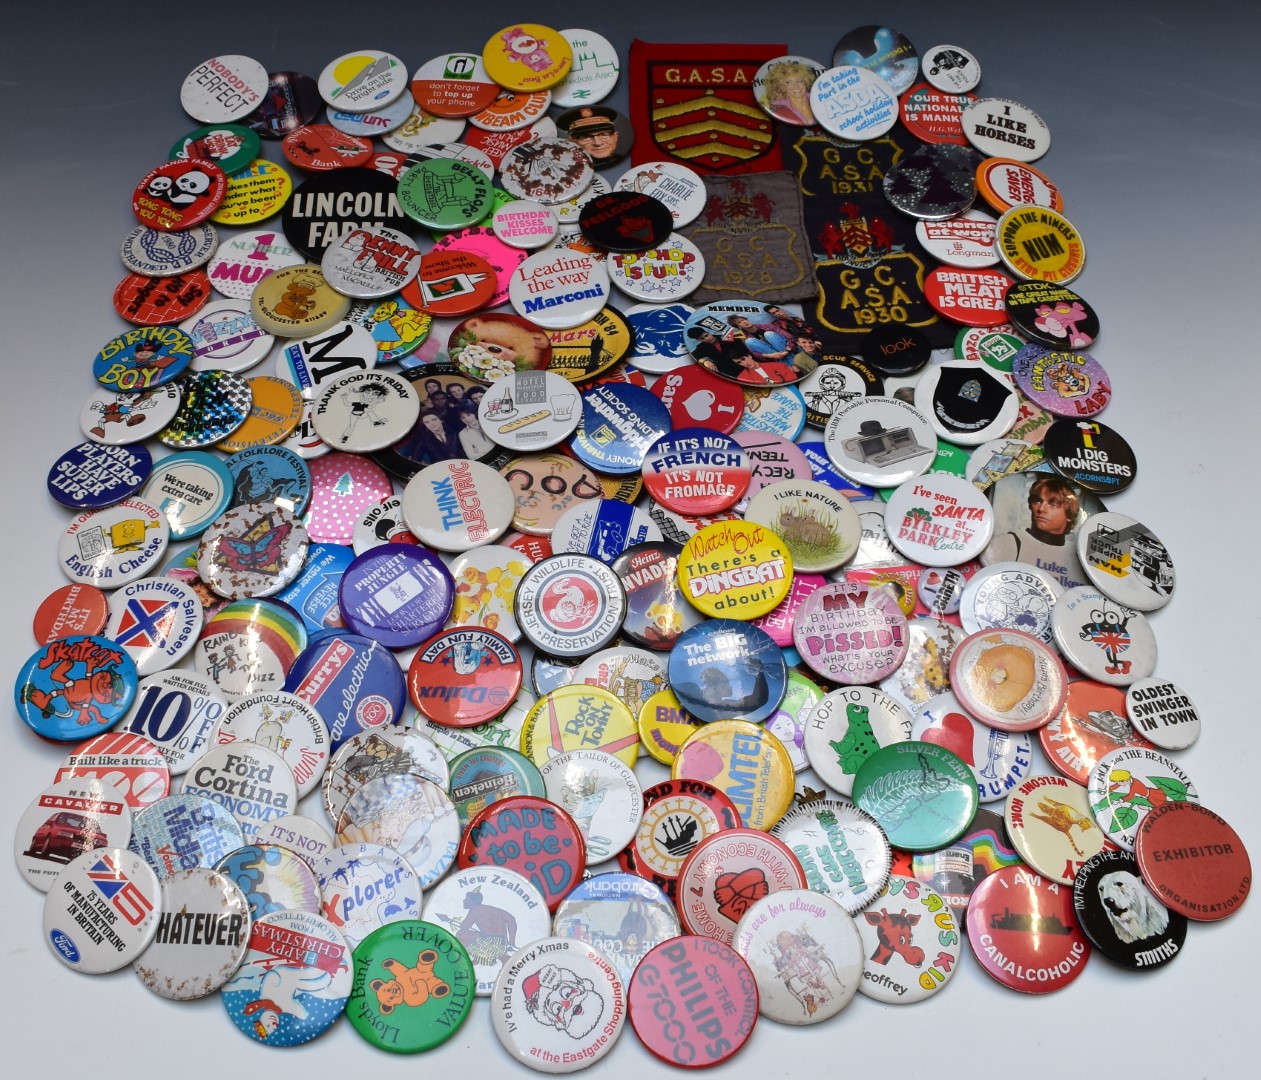 Over 1000 vintage and collectable badges including social history, advertising, humorous, slogans, - Image 2 of 9